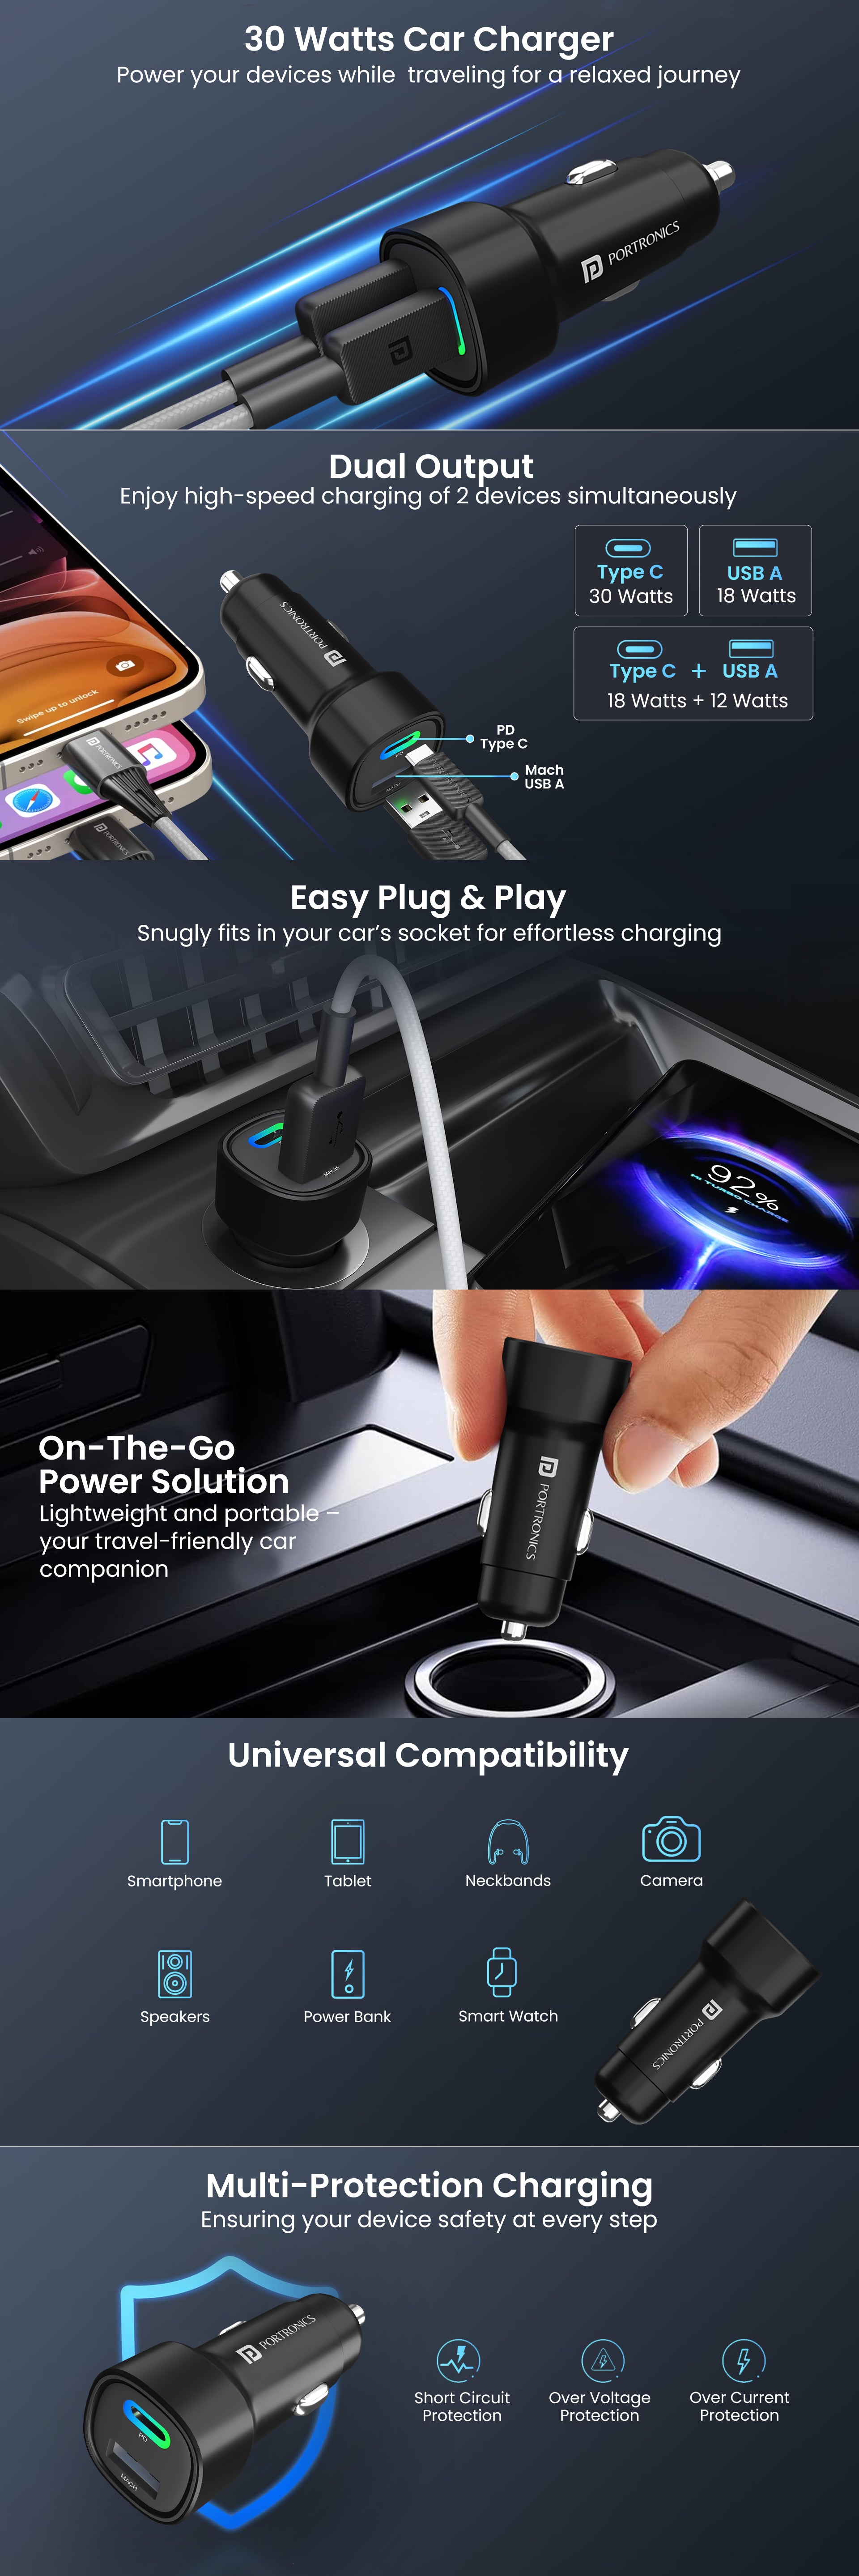 Portronics Car power charger 30 USB Type with a 51 W dual output